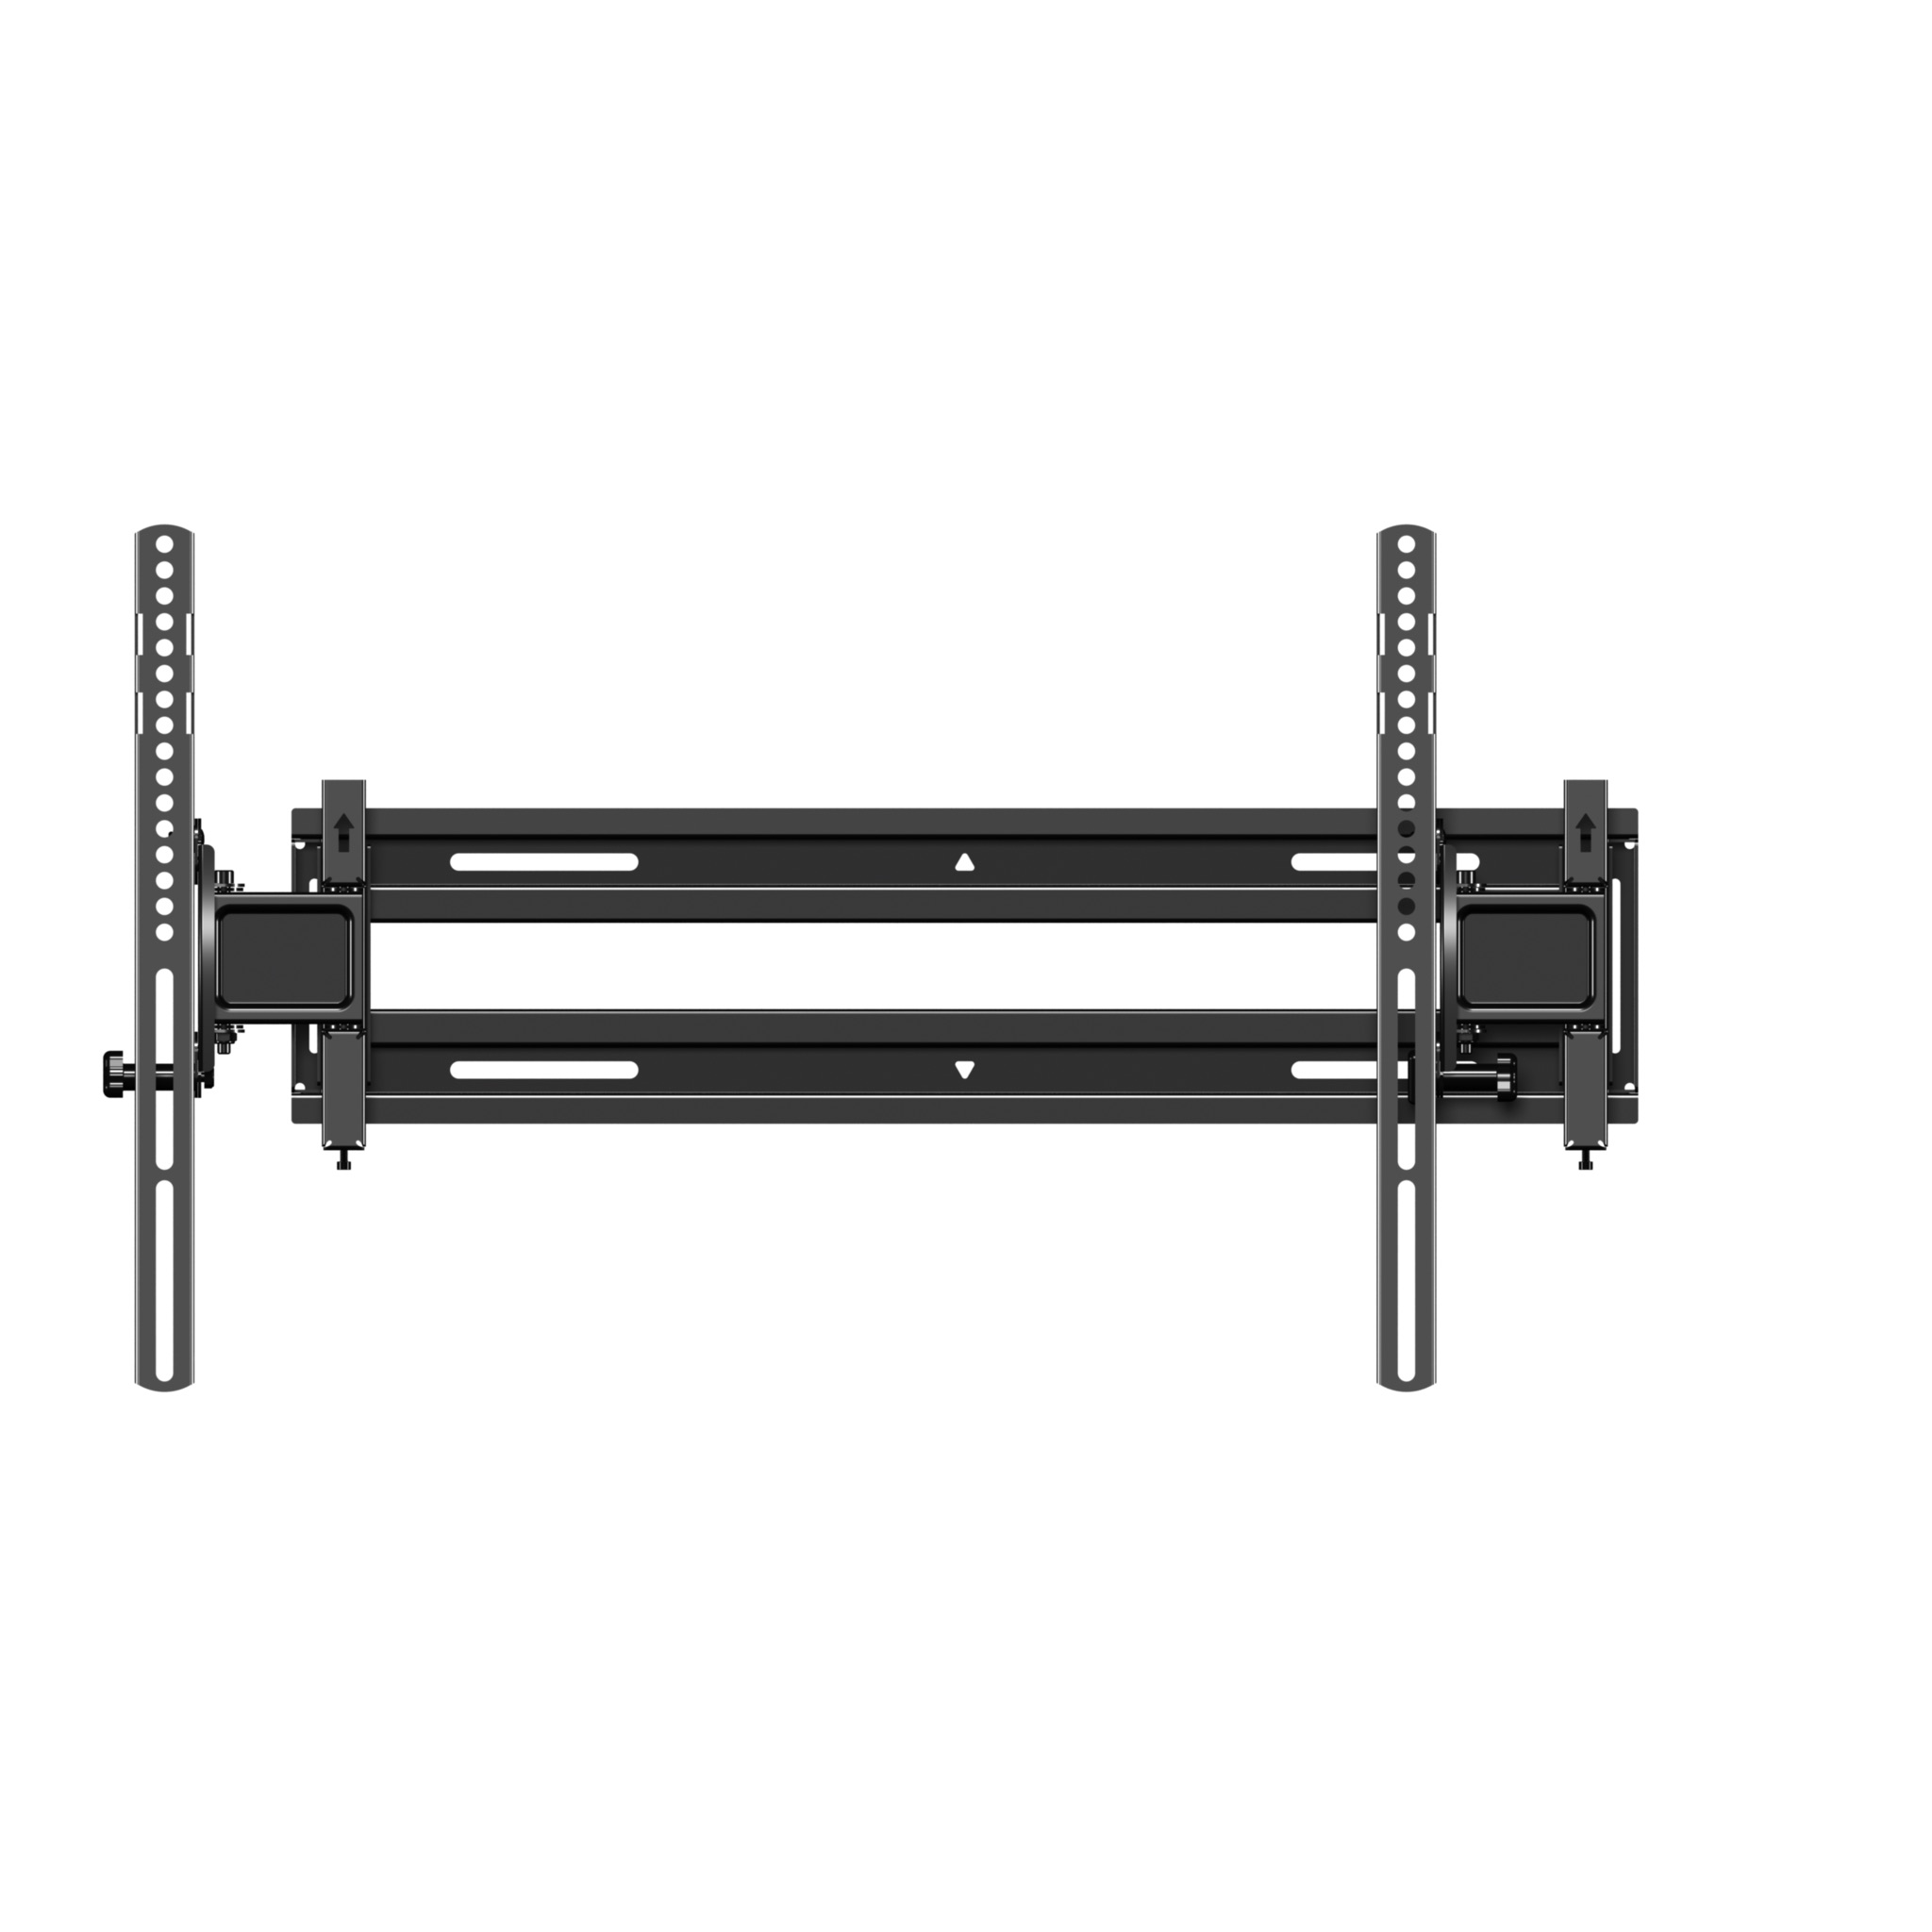 SANUS Vuepoint FLT1 Extend + Tilt TV Wall Mount for TVs 32"-70", Max Tilt and Easy Cable Access - image 3 of 9